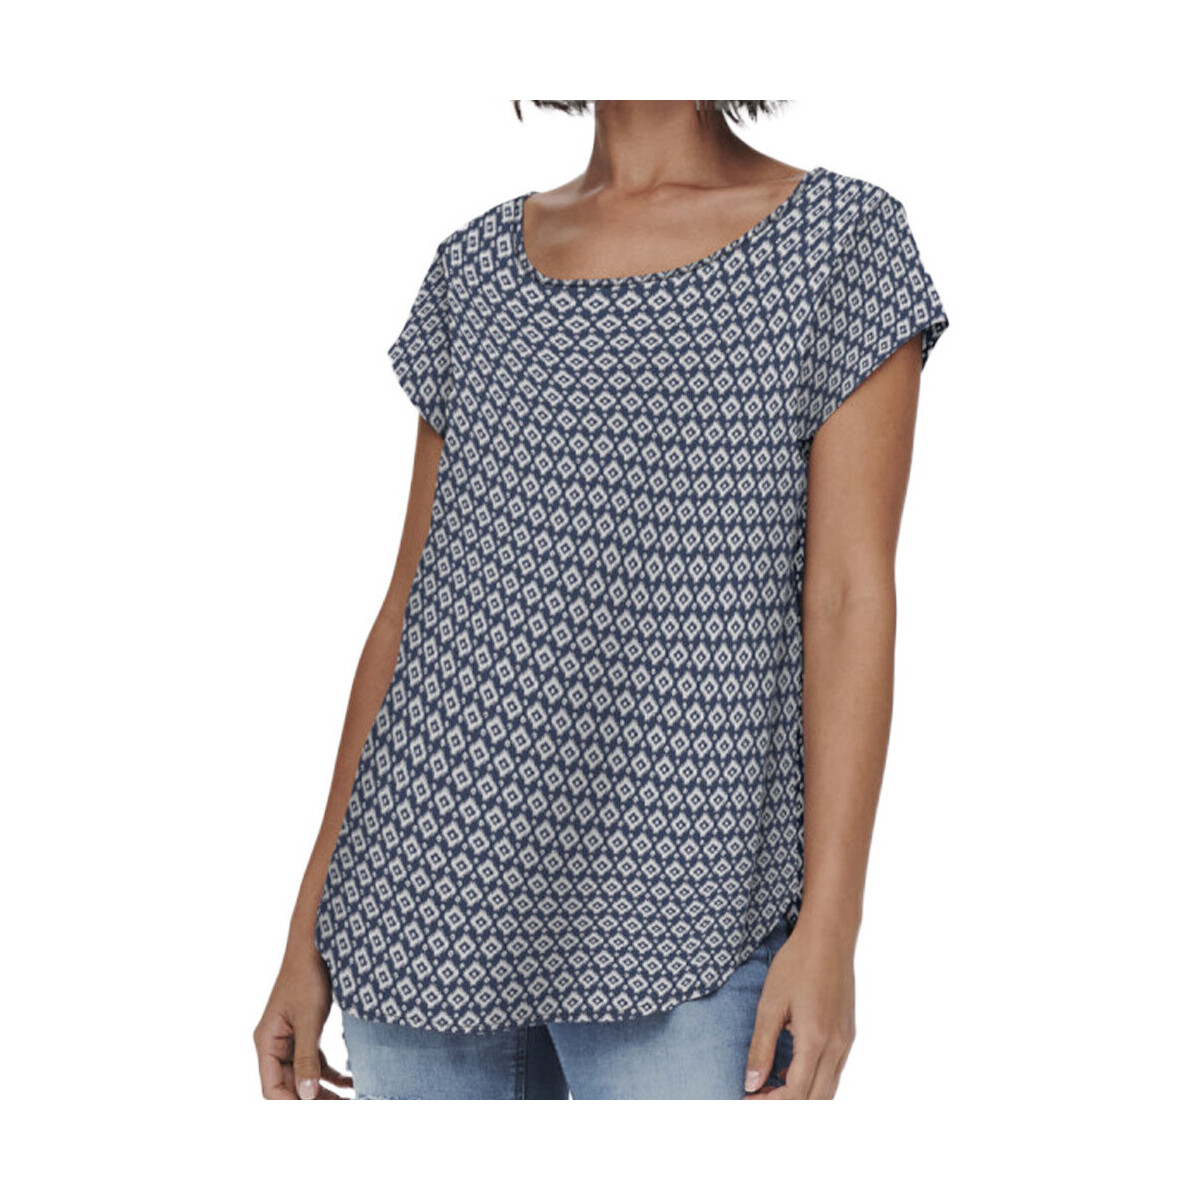 textil Mujer Tops y Camisetas Only  Azul